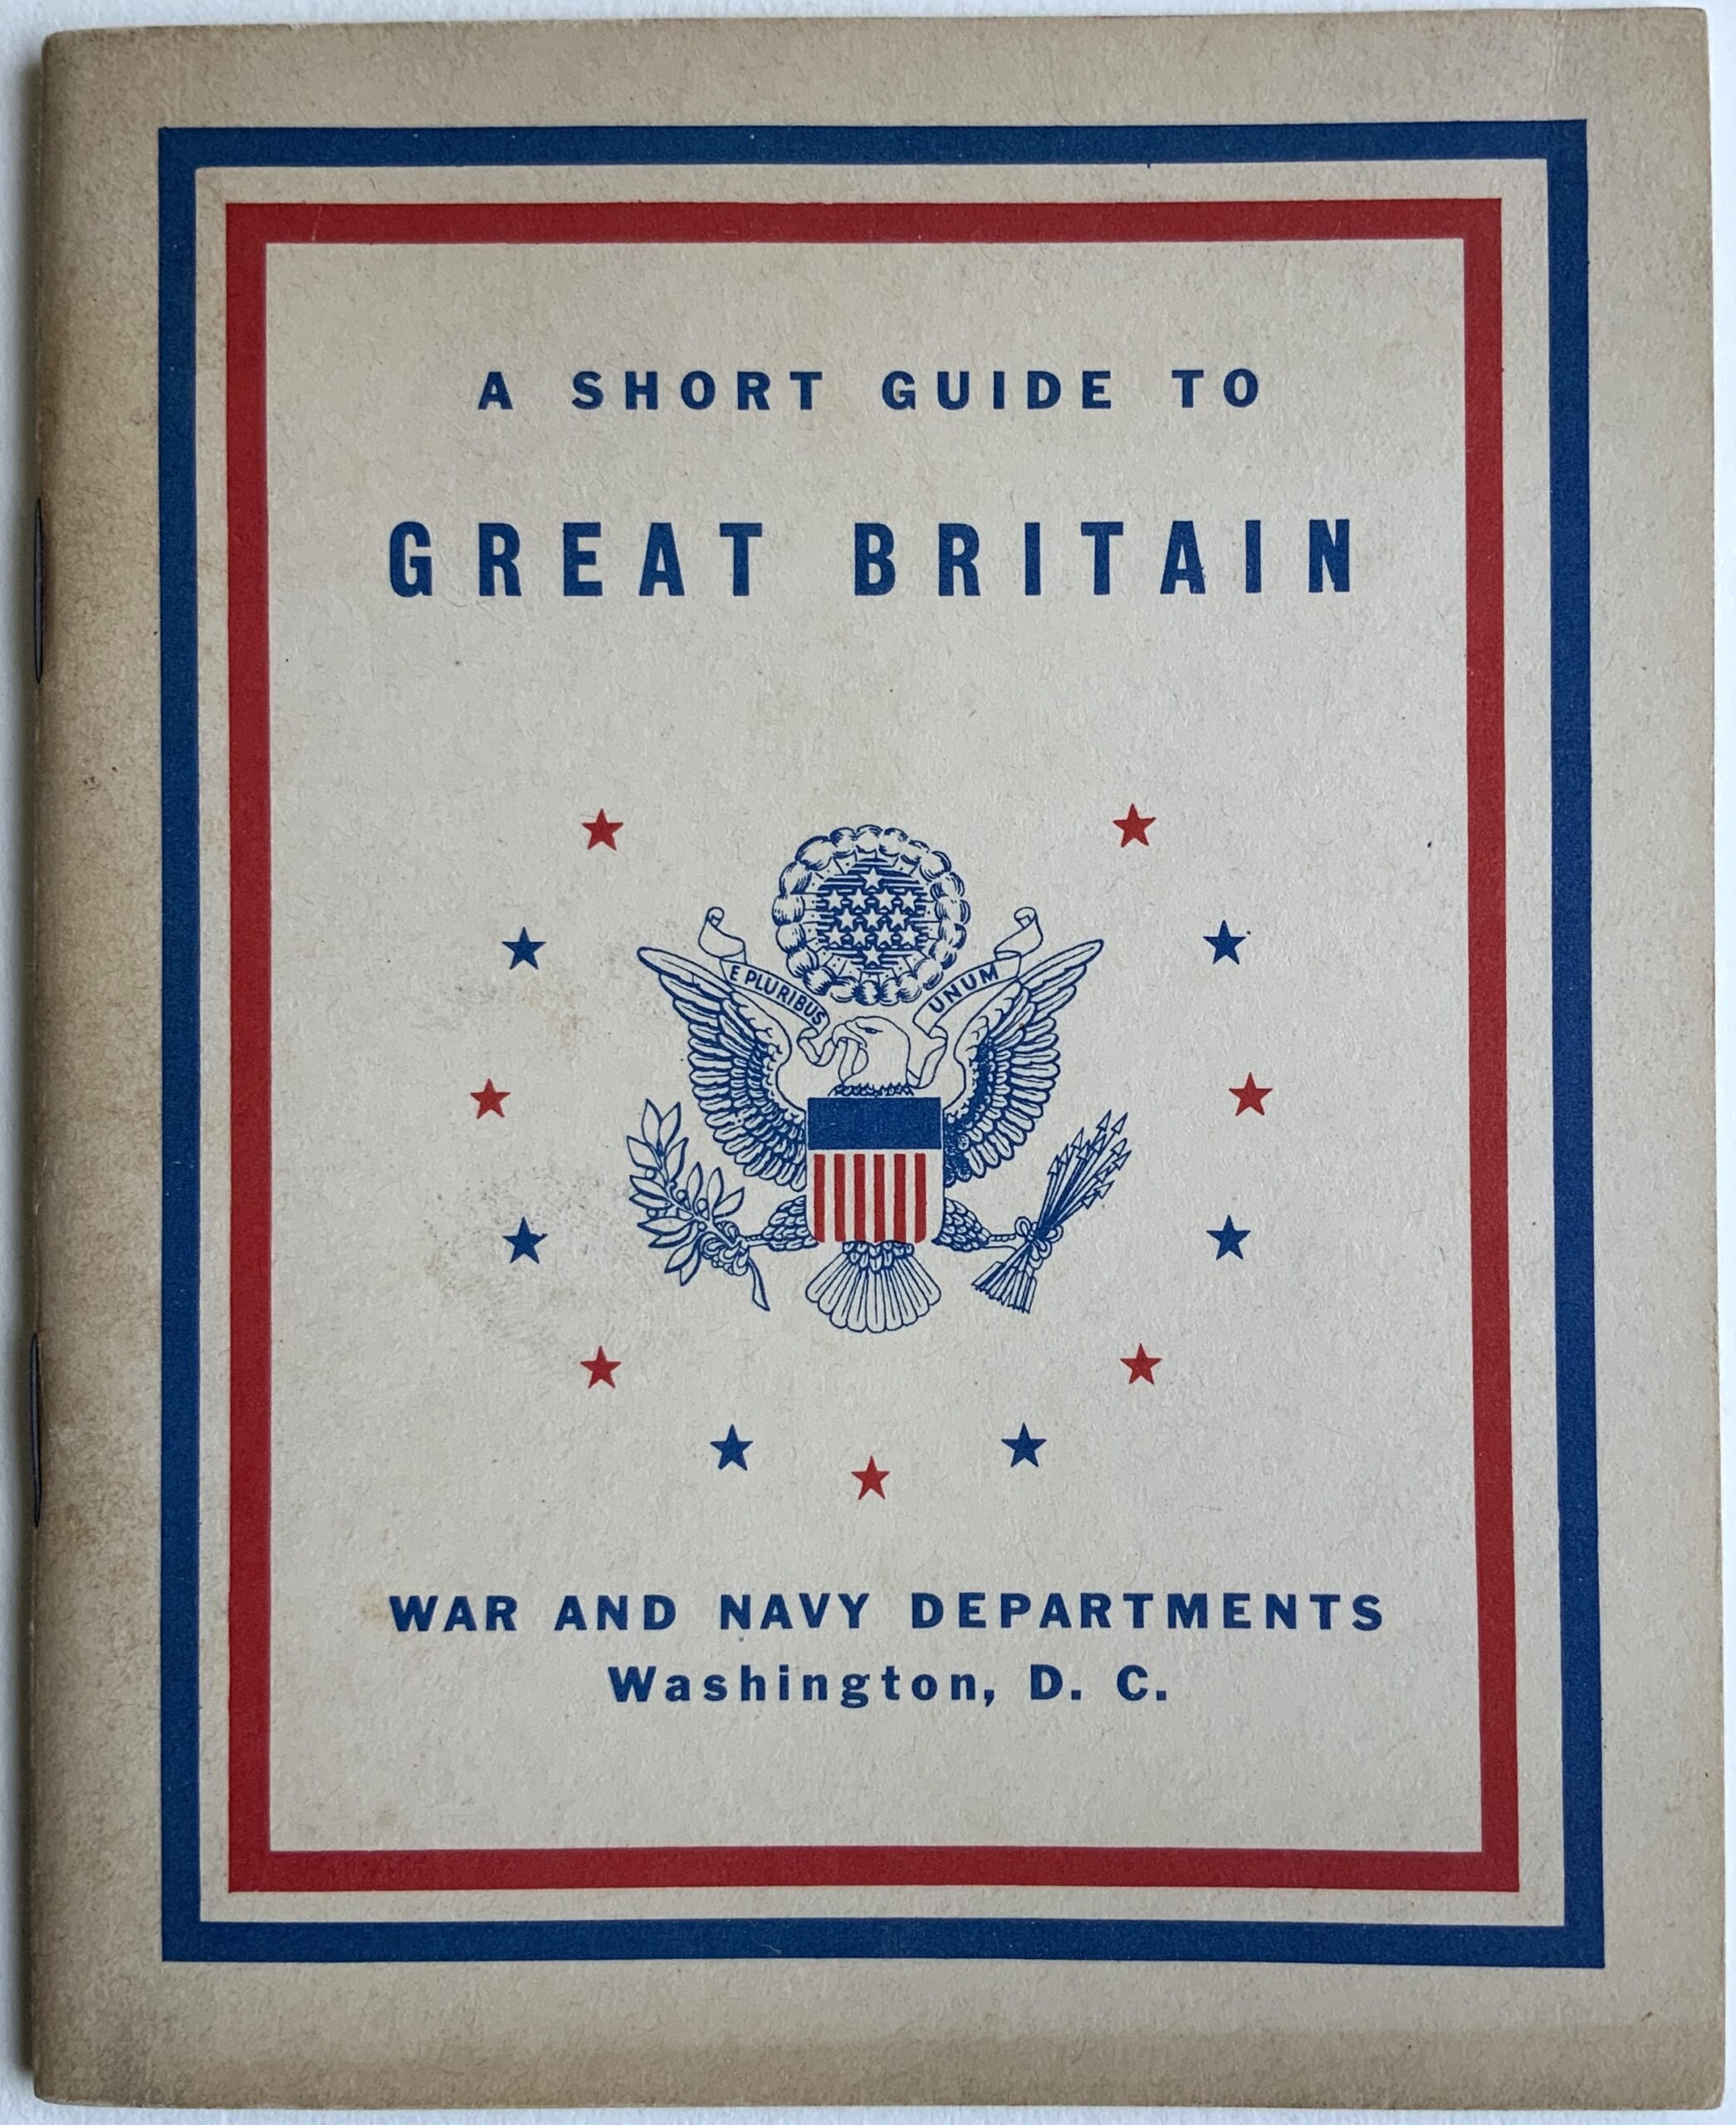 M90	A SHORT GUIDE TO GREAT BRITAIN ISSUED BY THE WAR AND NAVY DEPARTMENT, WASHINGTON 1944